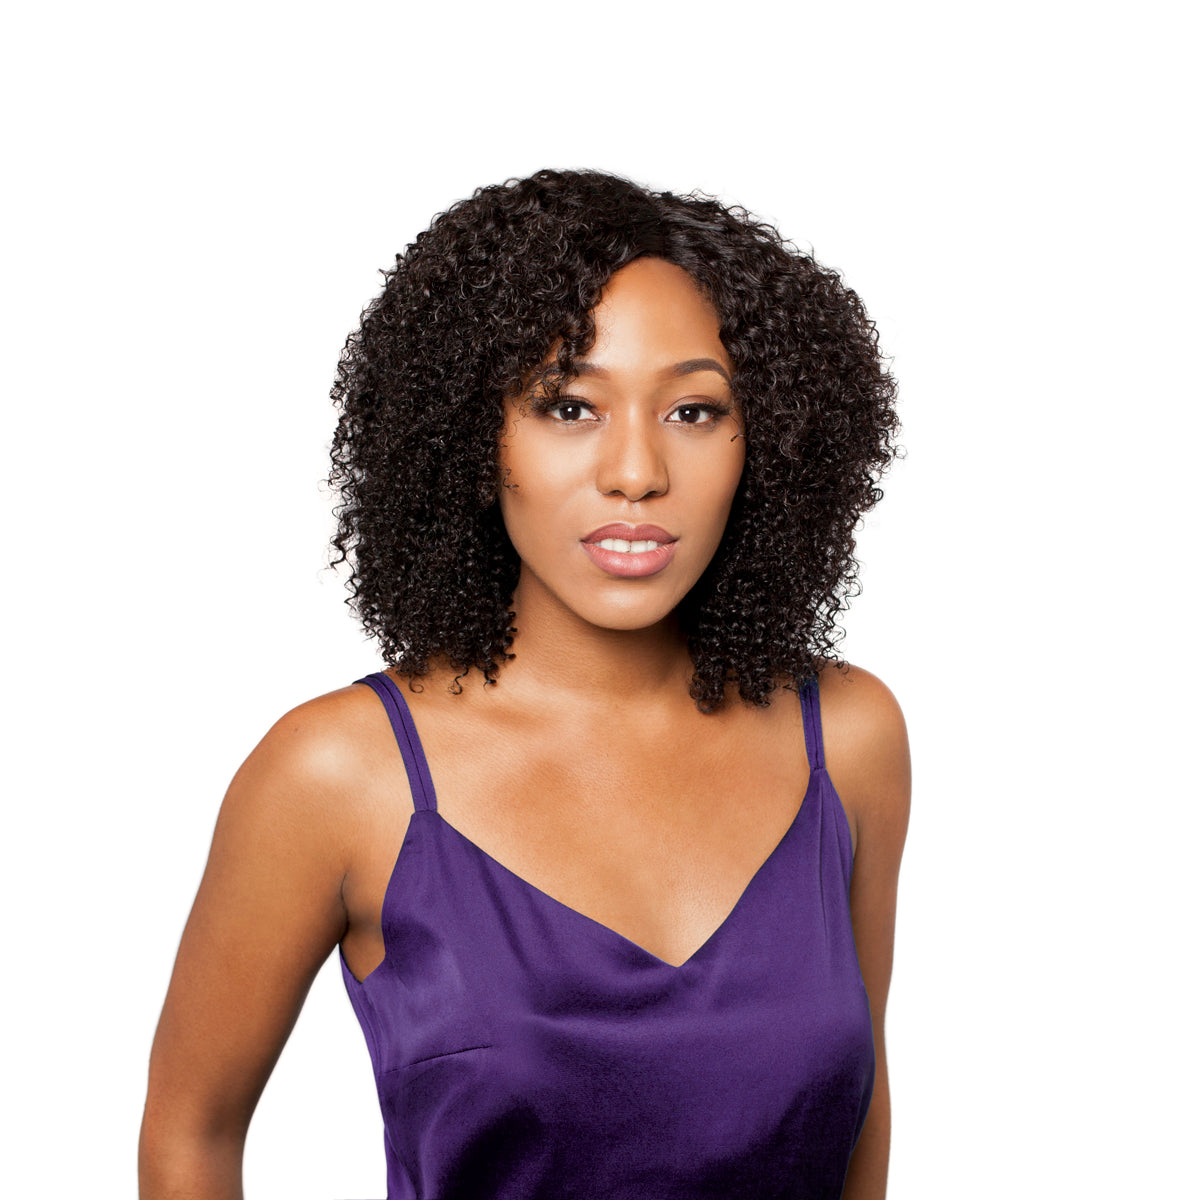 Kinky curly hairstyles give you beautifully defined curls to complete any look